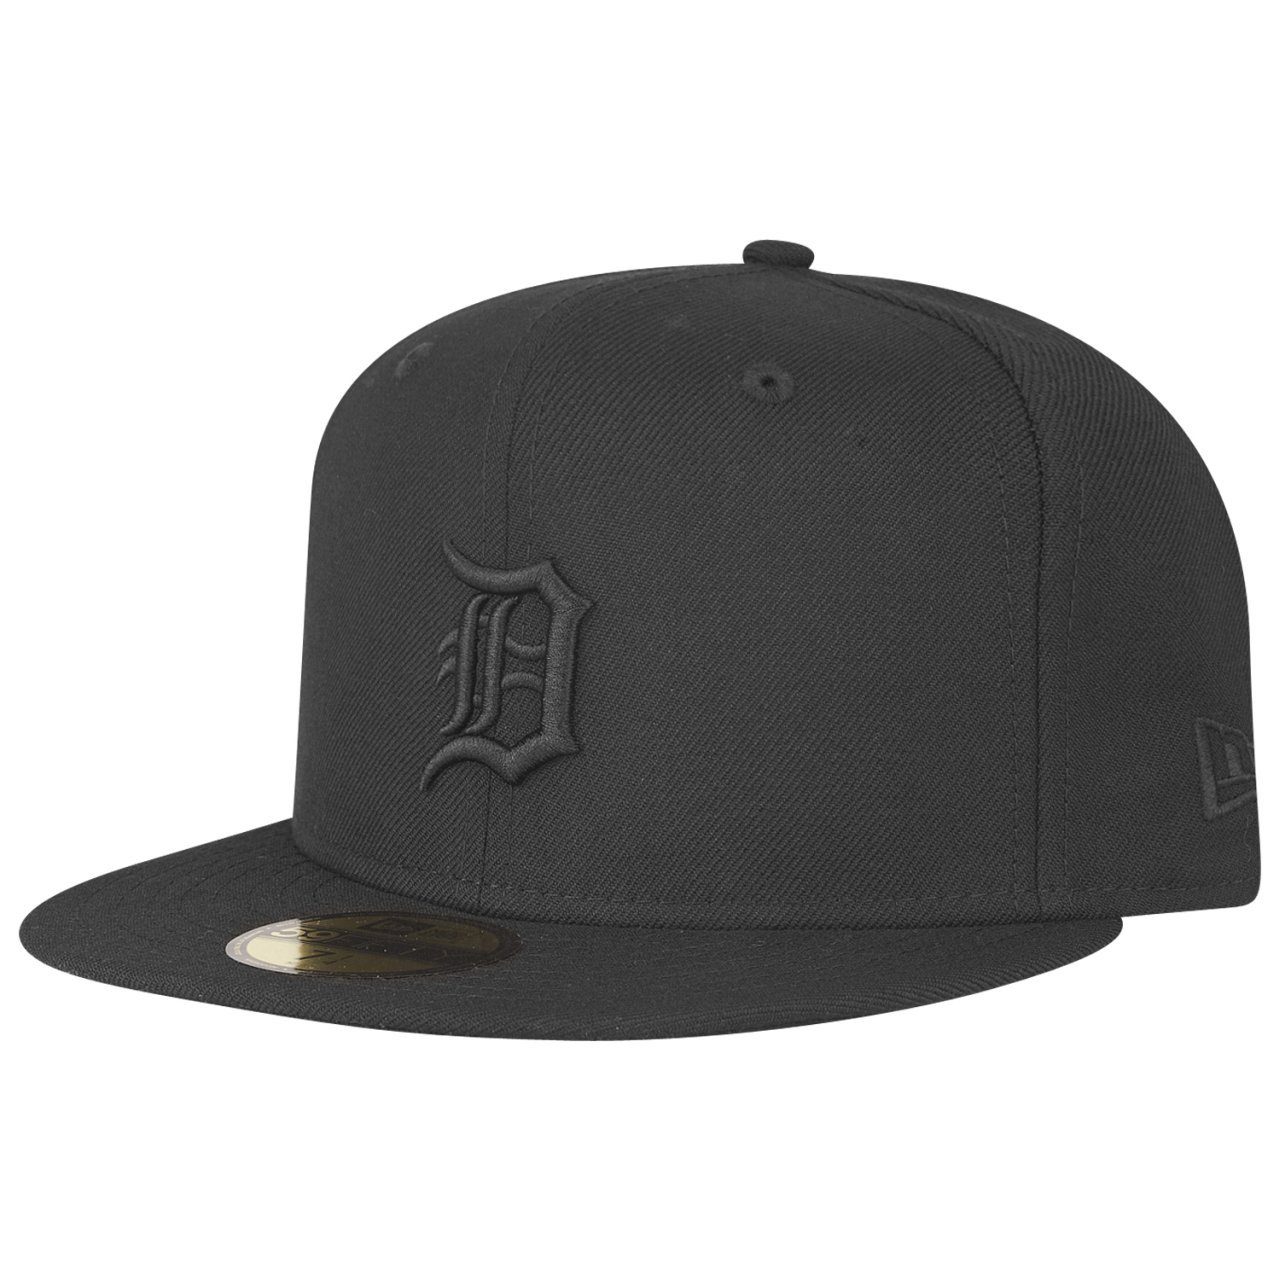 New Cap 59Fifty Fitted Detroit MLB Era Tigers